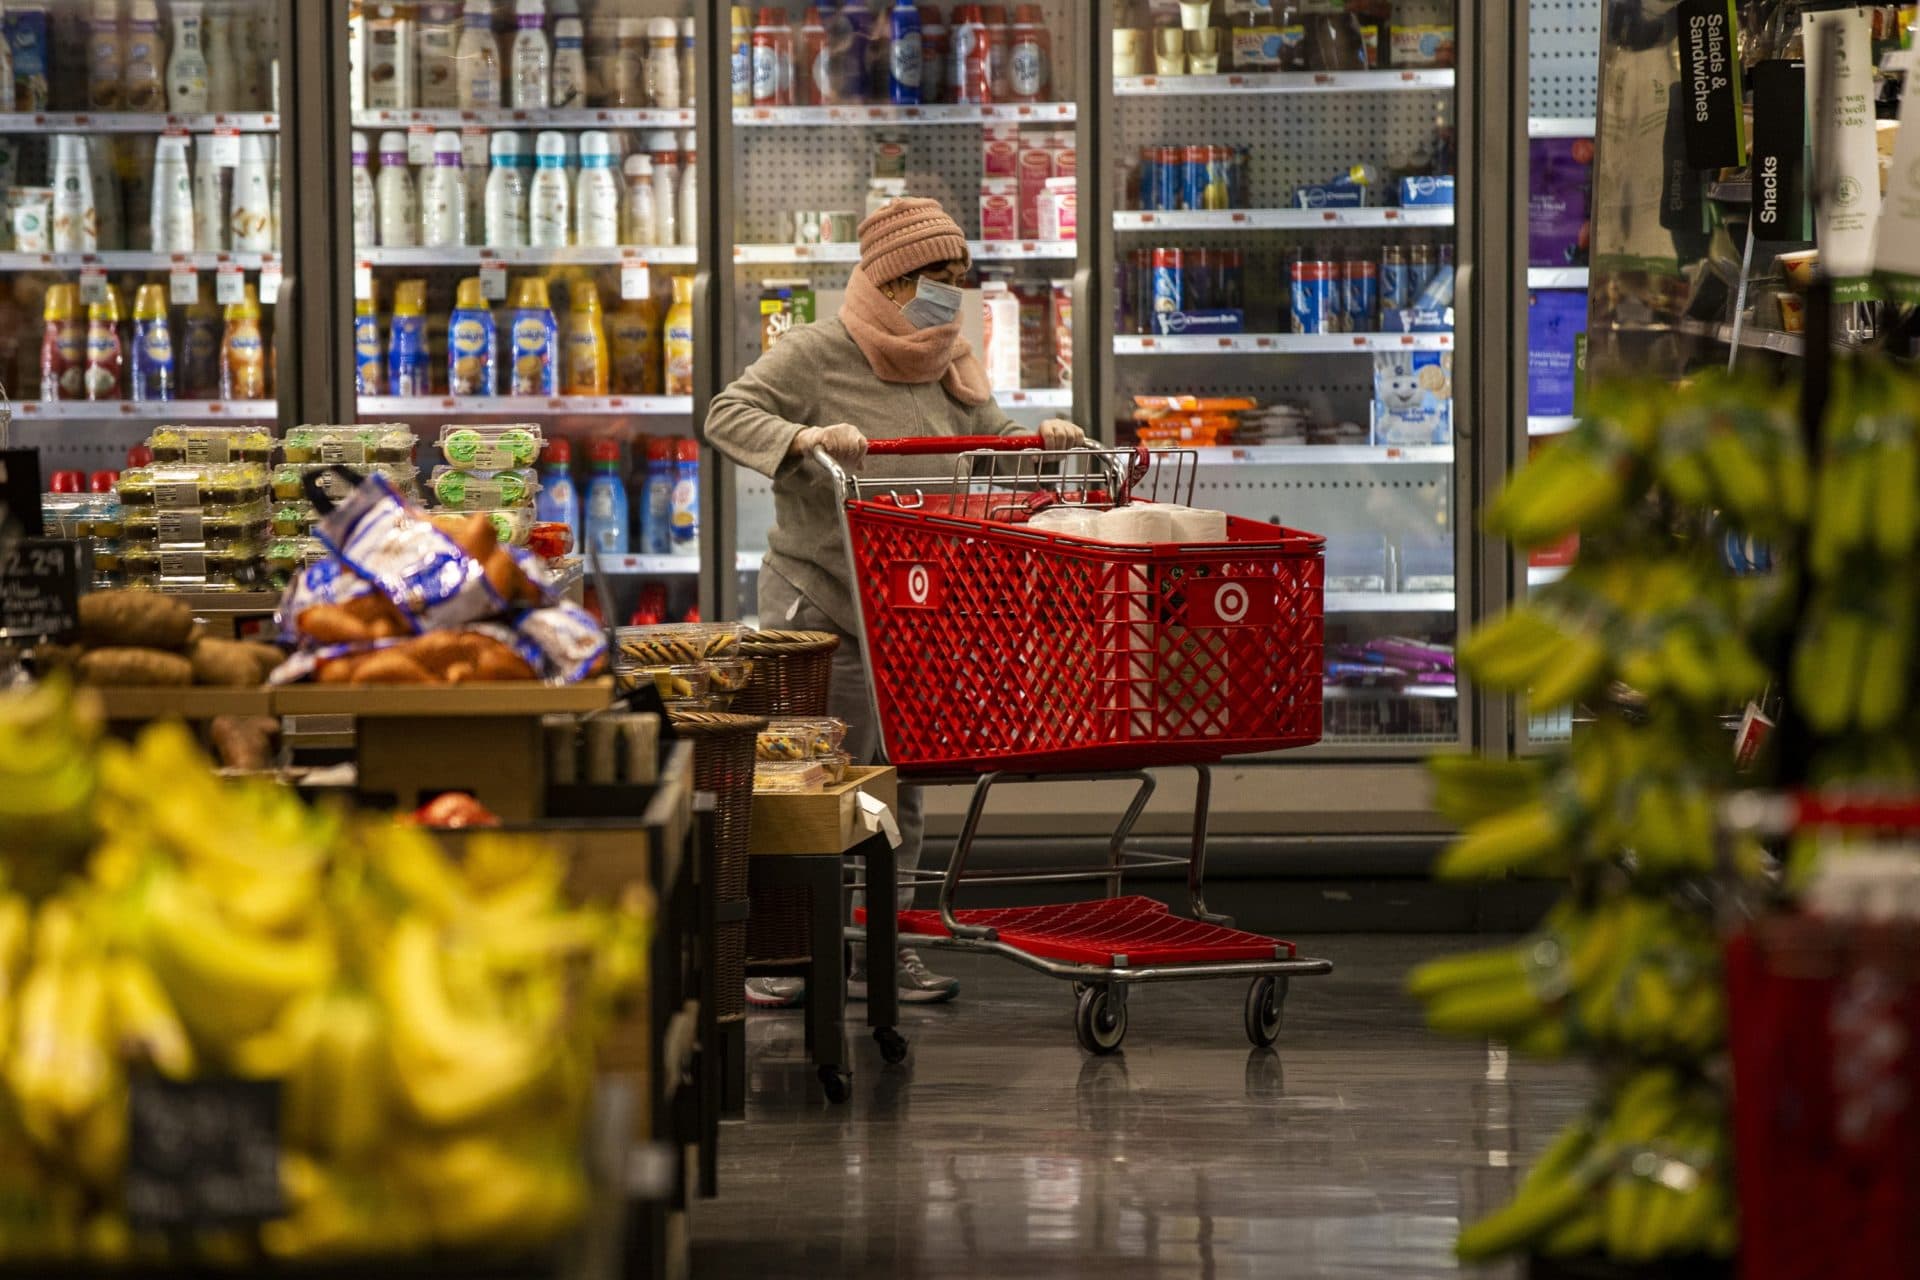 March 18: A woman wearing a face mask shops at Target in Watertown. (Jesse Costa/WBUR)